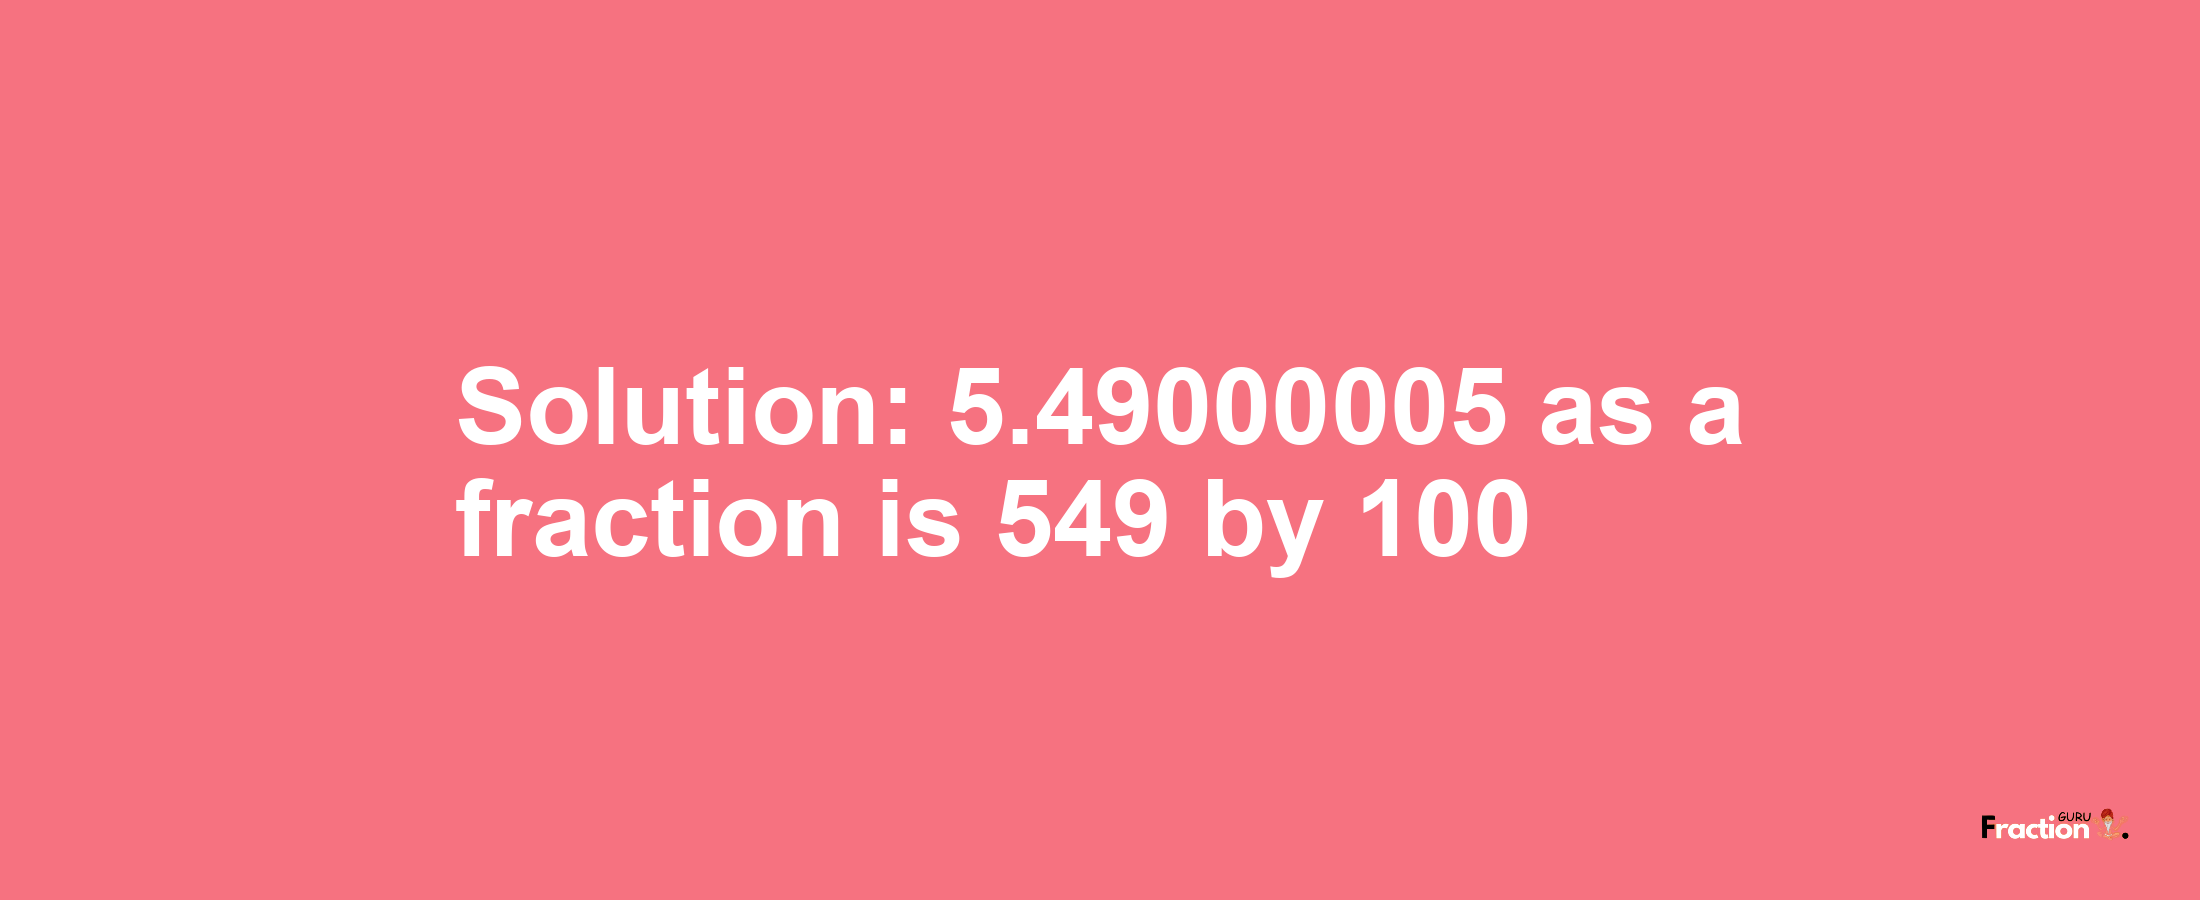 Solution:5.49000005 as a fraction is 549/100